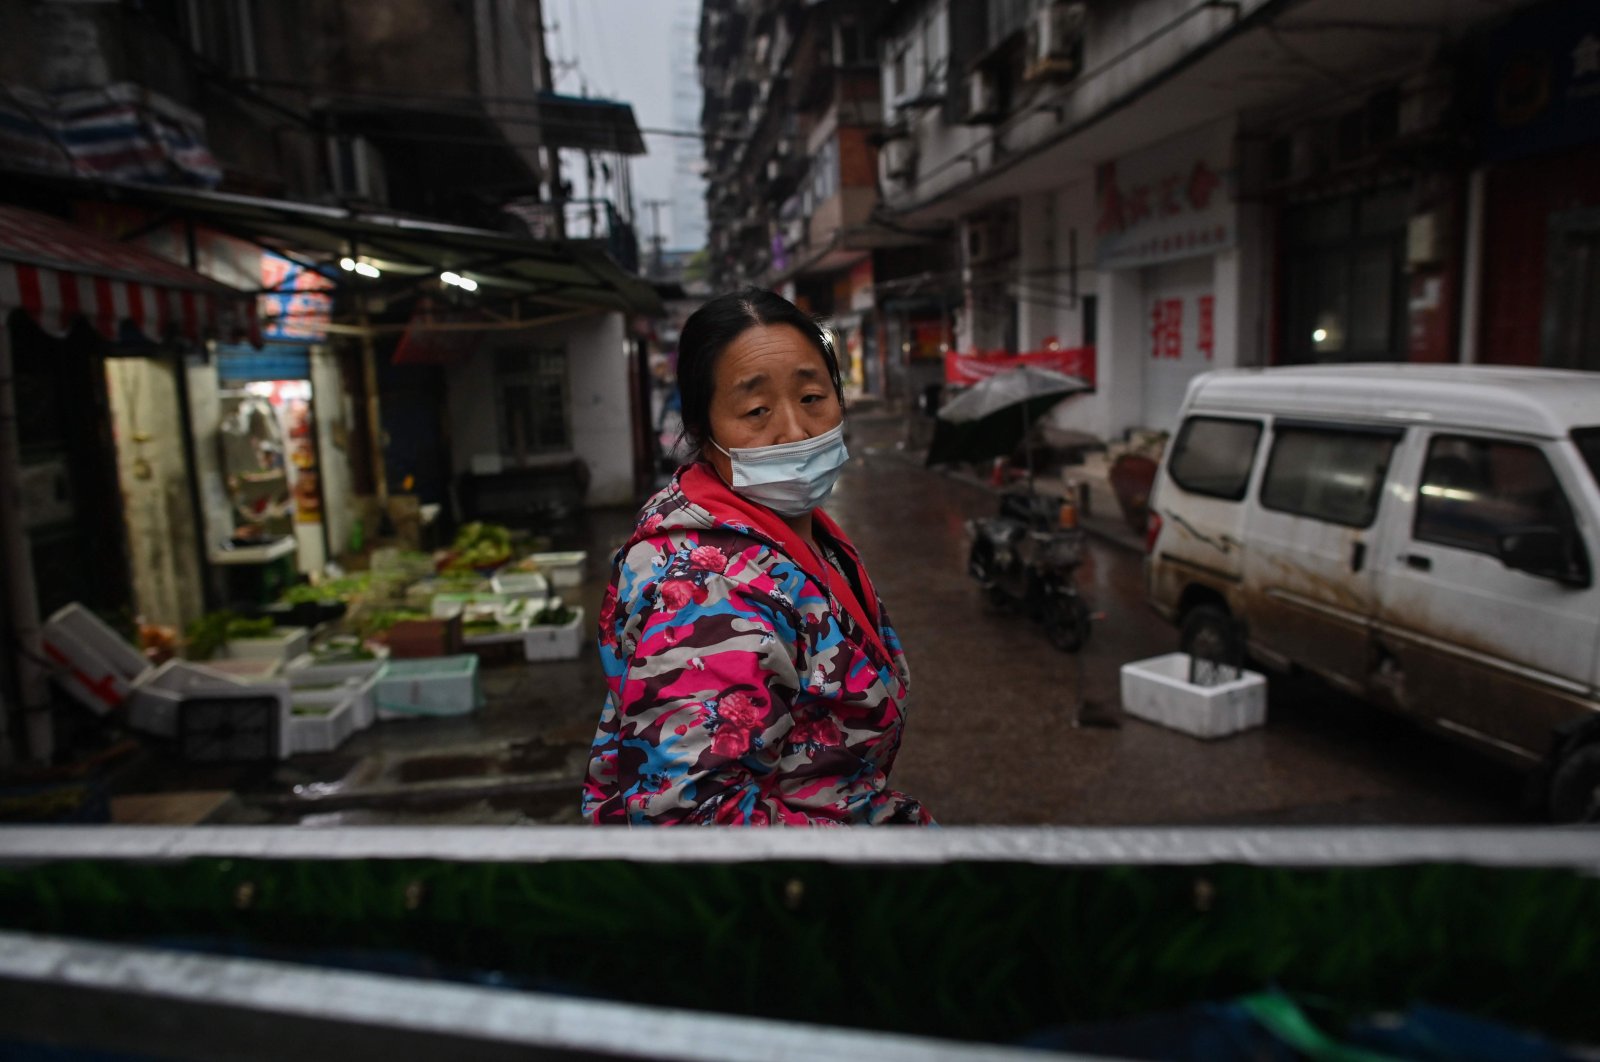 A woman, wearing a face mask as a preventive measure against the spread of the COVID-19 stands at an access to a neighborhood closed off by barriers in Wuhan, China's central Hubei province, Monday, April 20, 2020. (AFP Photo)